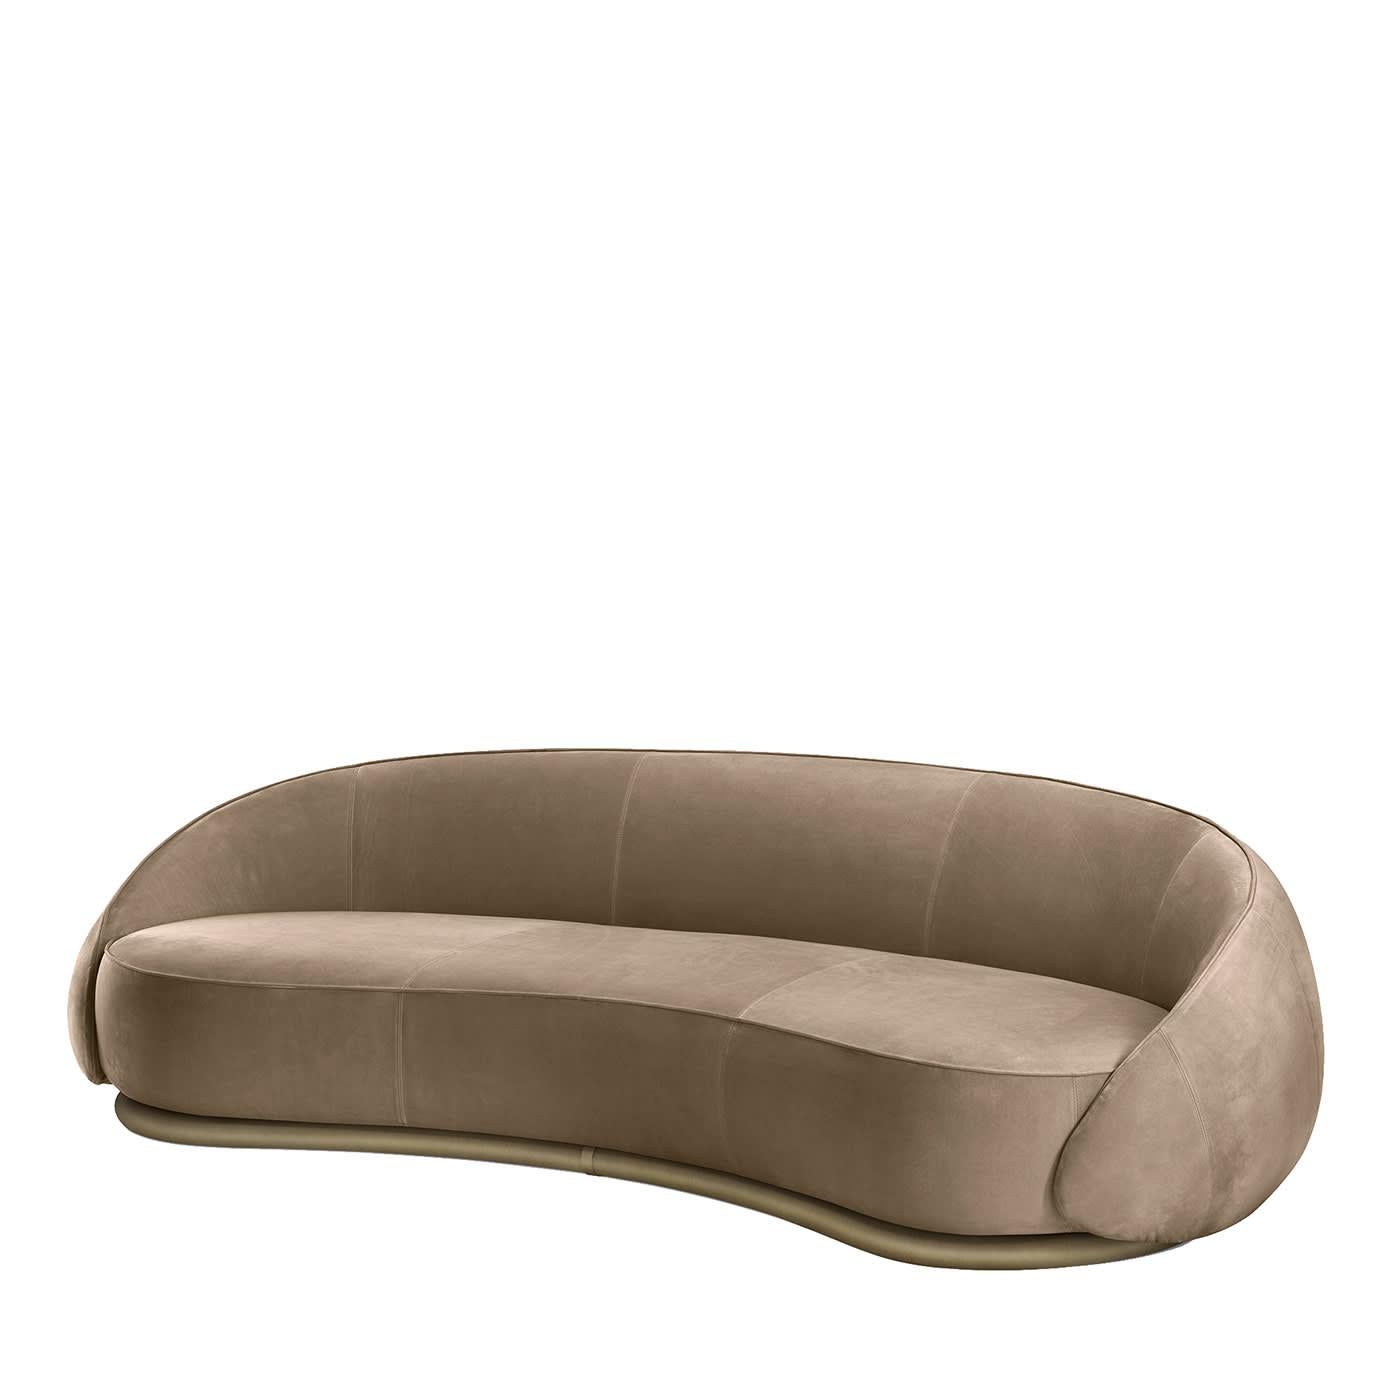 Enveloping lines and plump volumes synthesize the sculptural silhouette of this sofa, exclusive design inspired by hugs and hence named after the Italian for them. Prized, taupe-hued leather upholstery envelops the sinuous seat and embracing